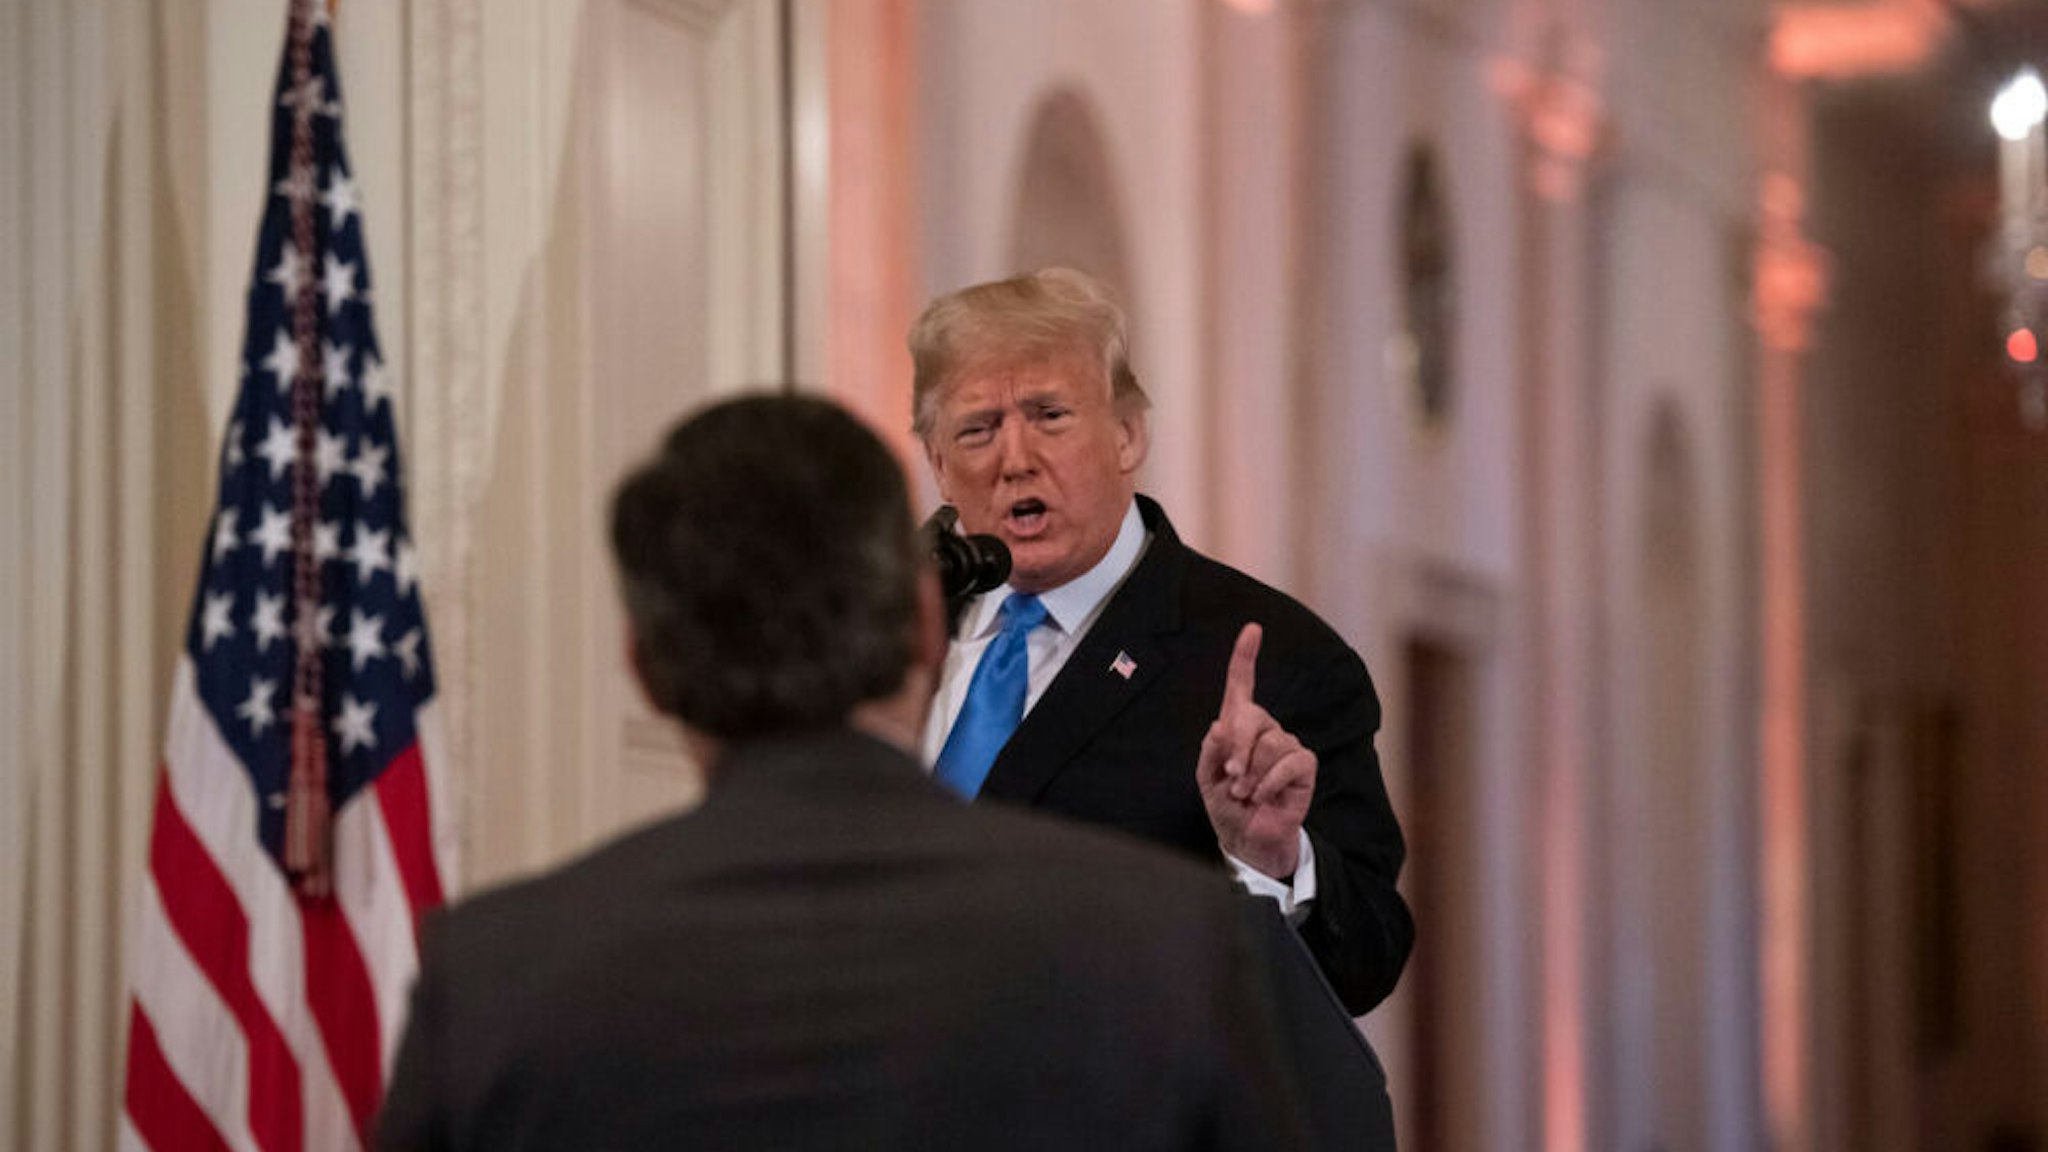 WASHINGTON, DC - NOVEMBER 7: President Donald Trump speaks to Jim Acosta of CNN during a press conference in the East Room of the White House in Washington, D.C. on November 7, 2018.